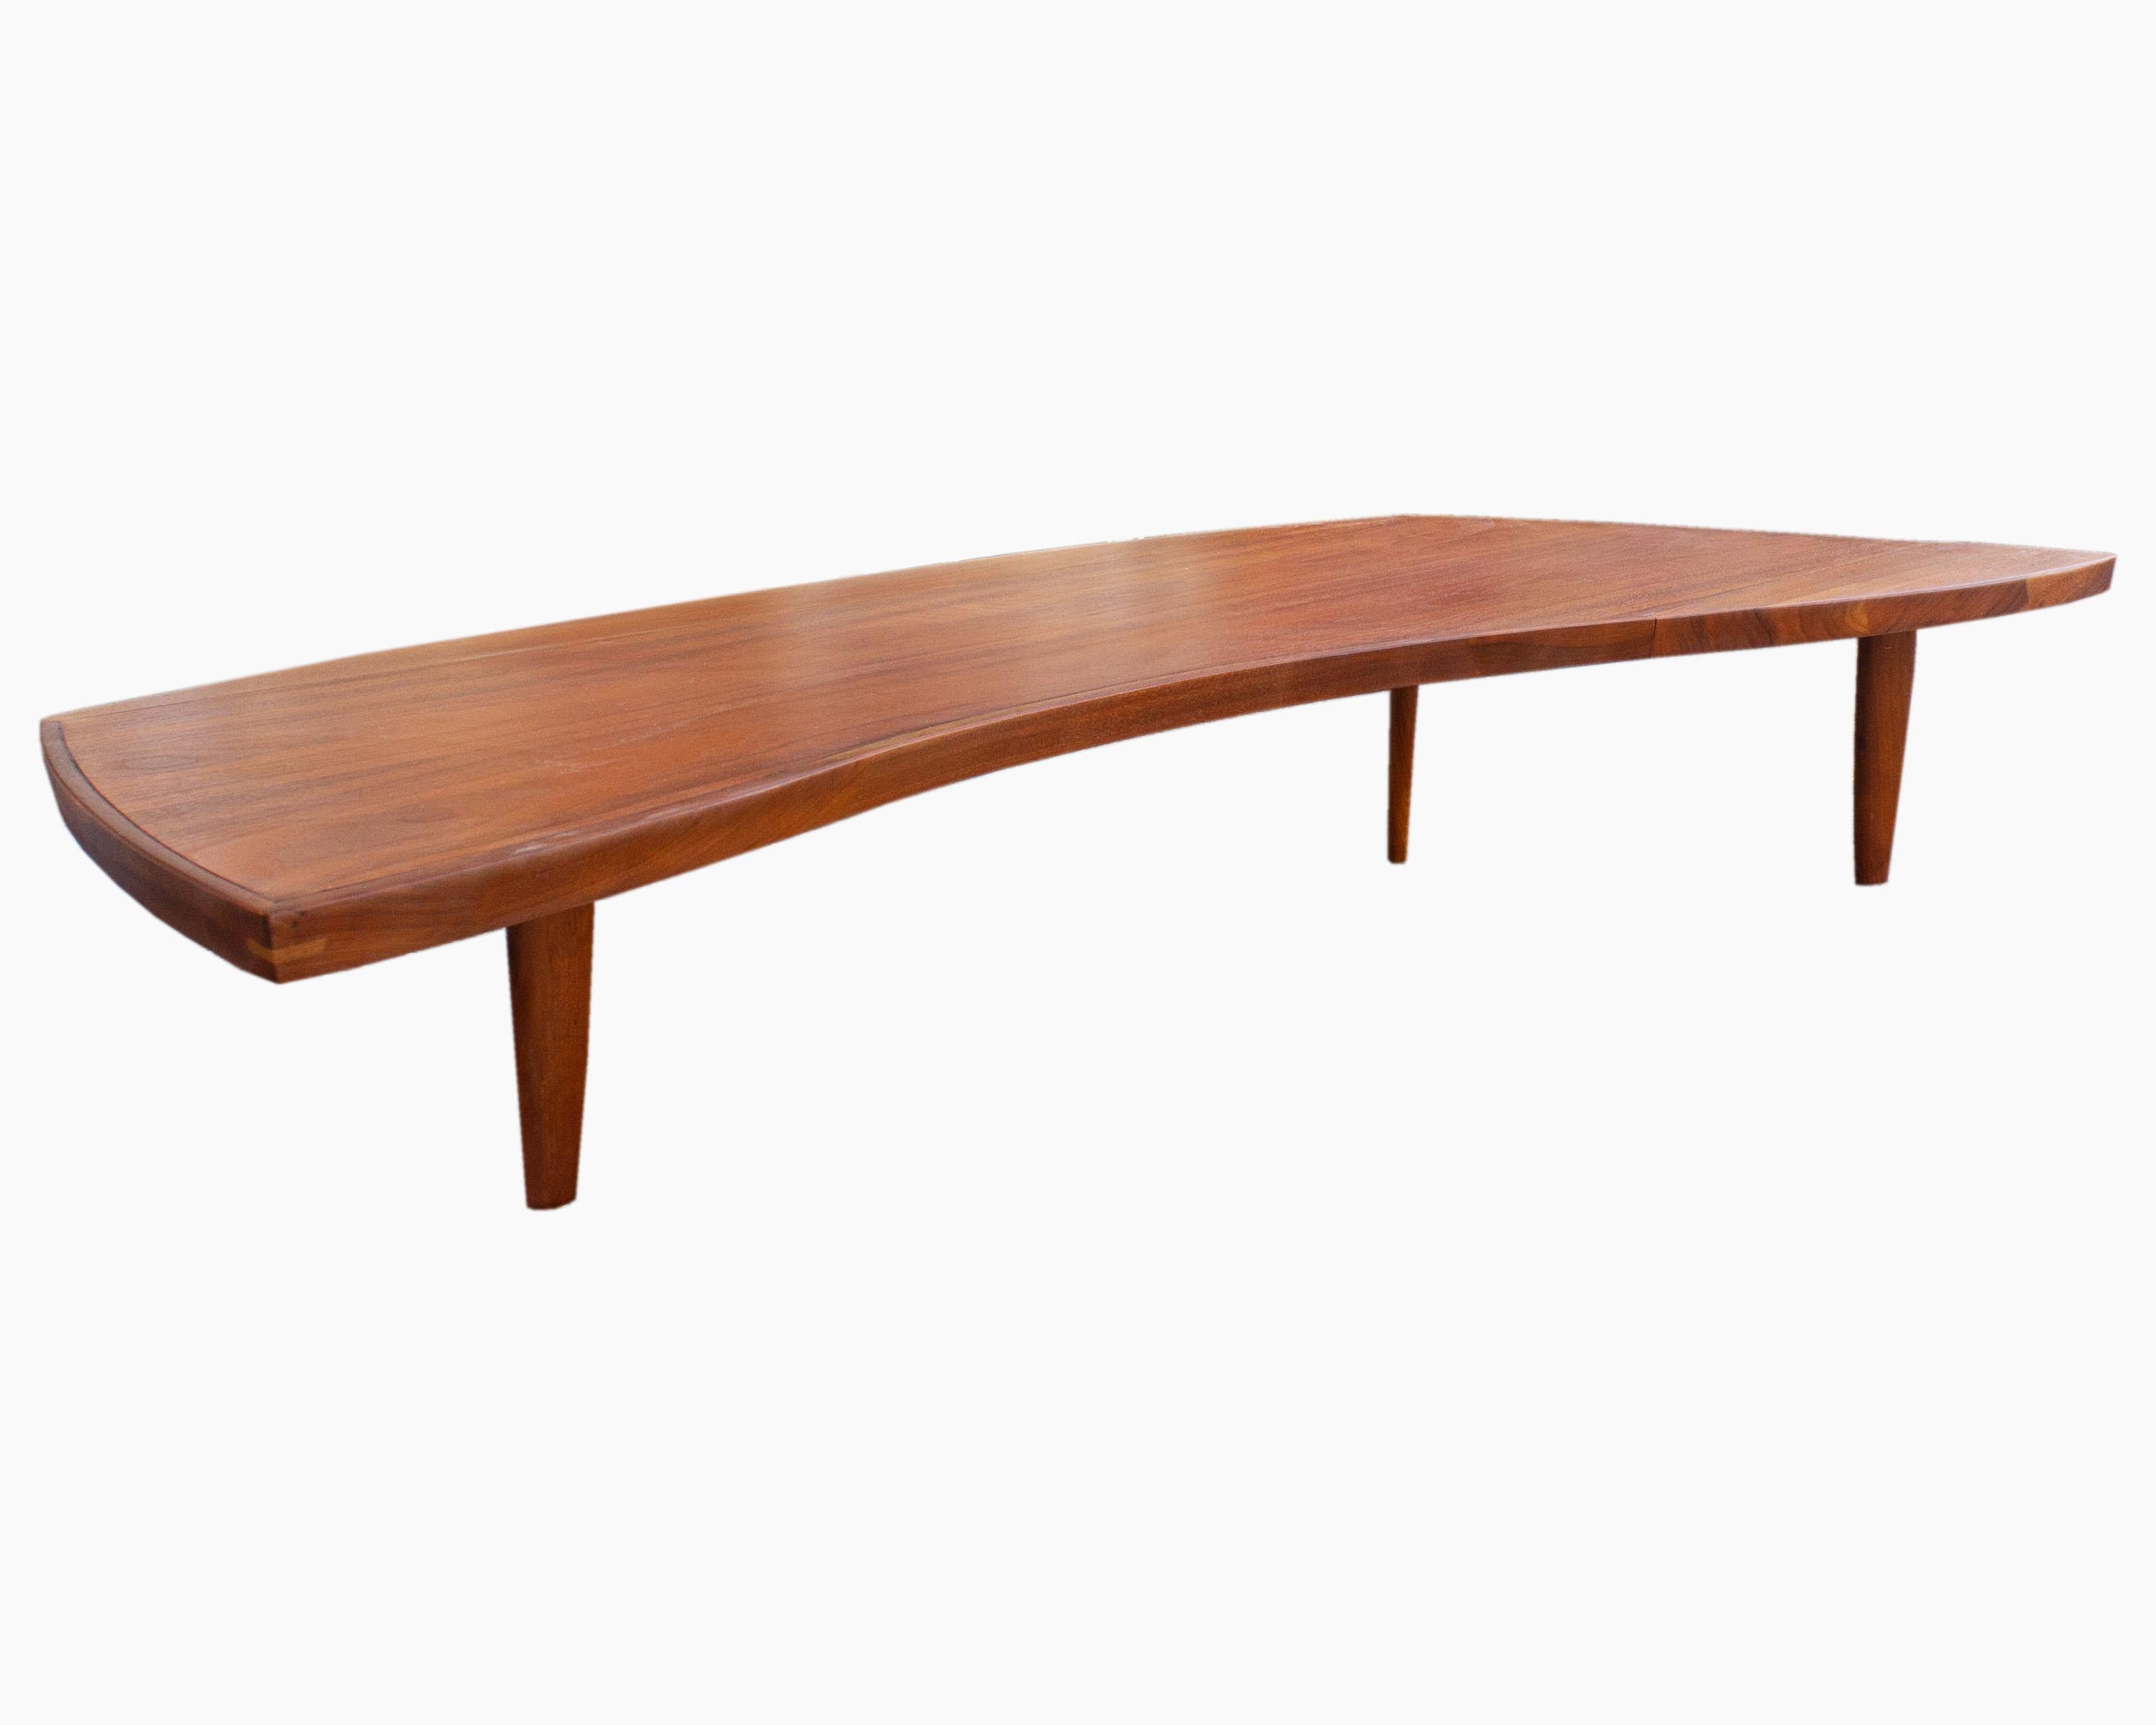 A Mid Century Modern Sundra coffee table designed by Japanese-American architect, woodworker, and furniture maker George Nakashima (1905-1990) for Widdicomb Furniture Company of Grand Rapids, Michigan. Composed of walnut, the elongated and low-set